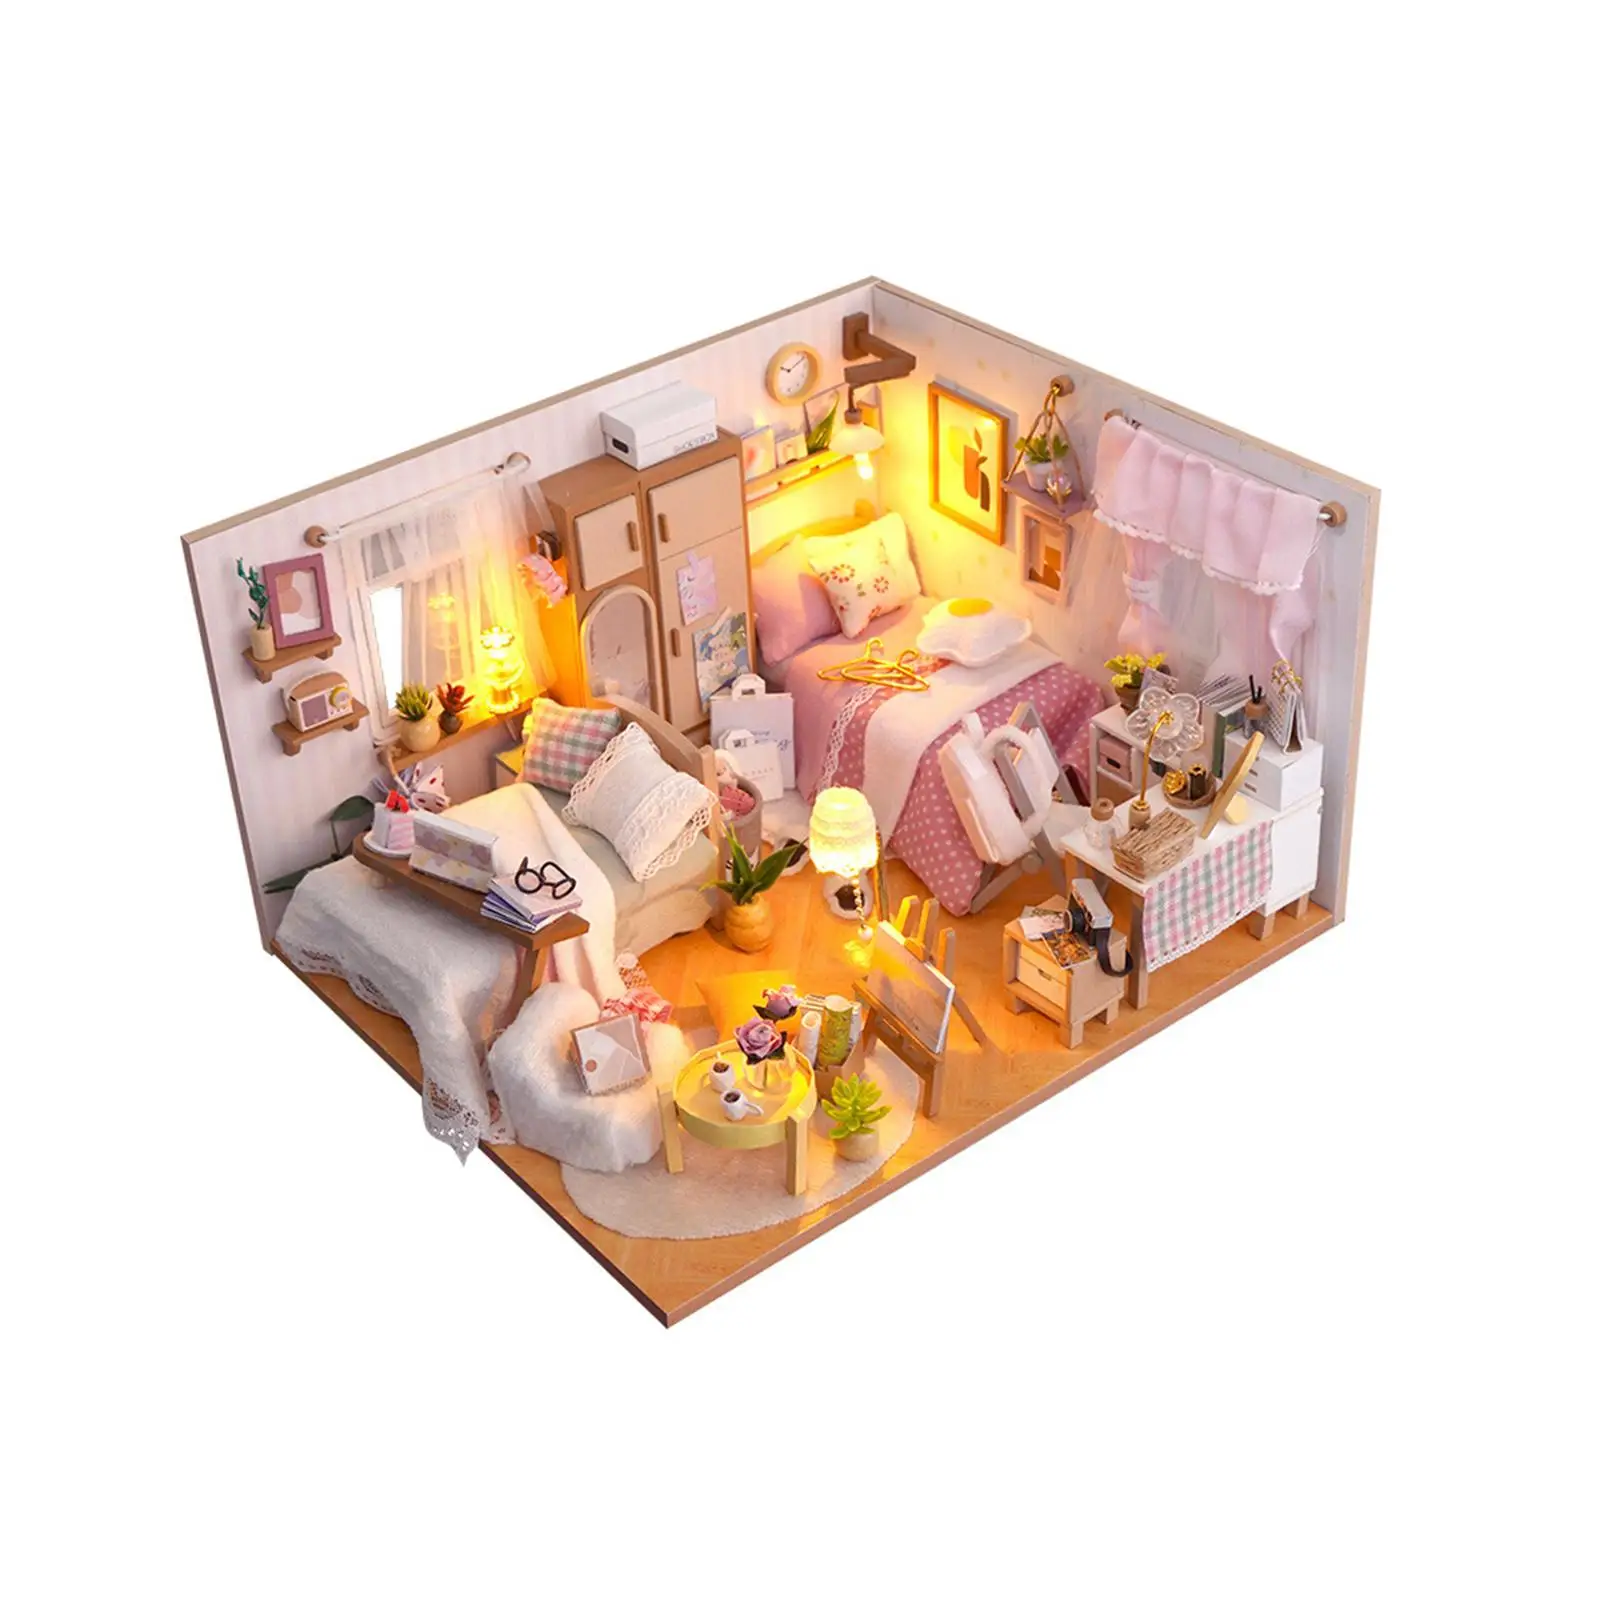 Wooden Miniature Dollhouse Kits Doll House Model for Boys Girls with Furniture